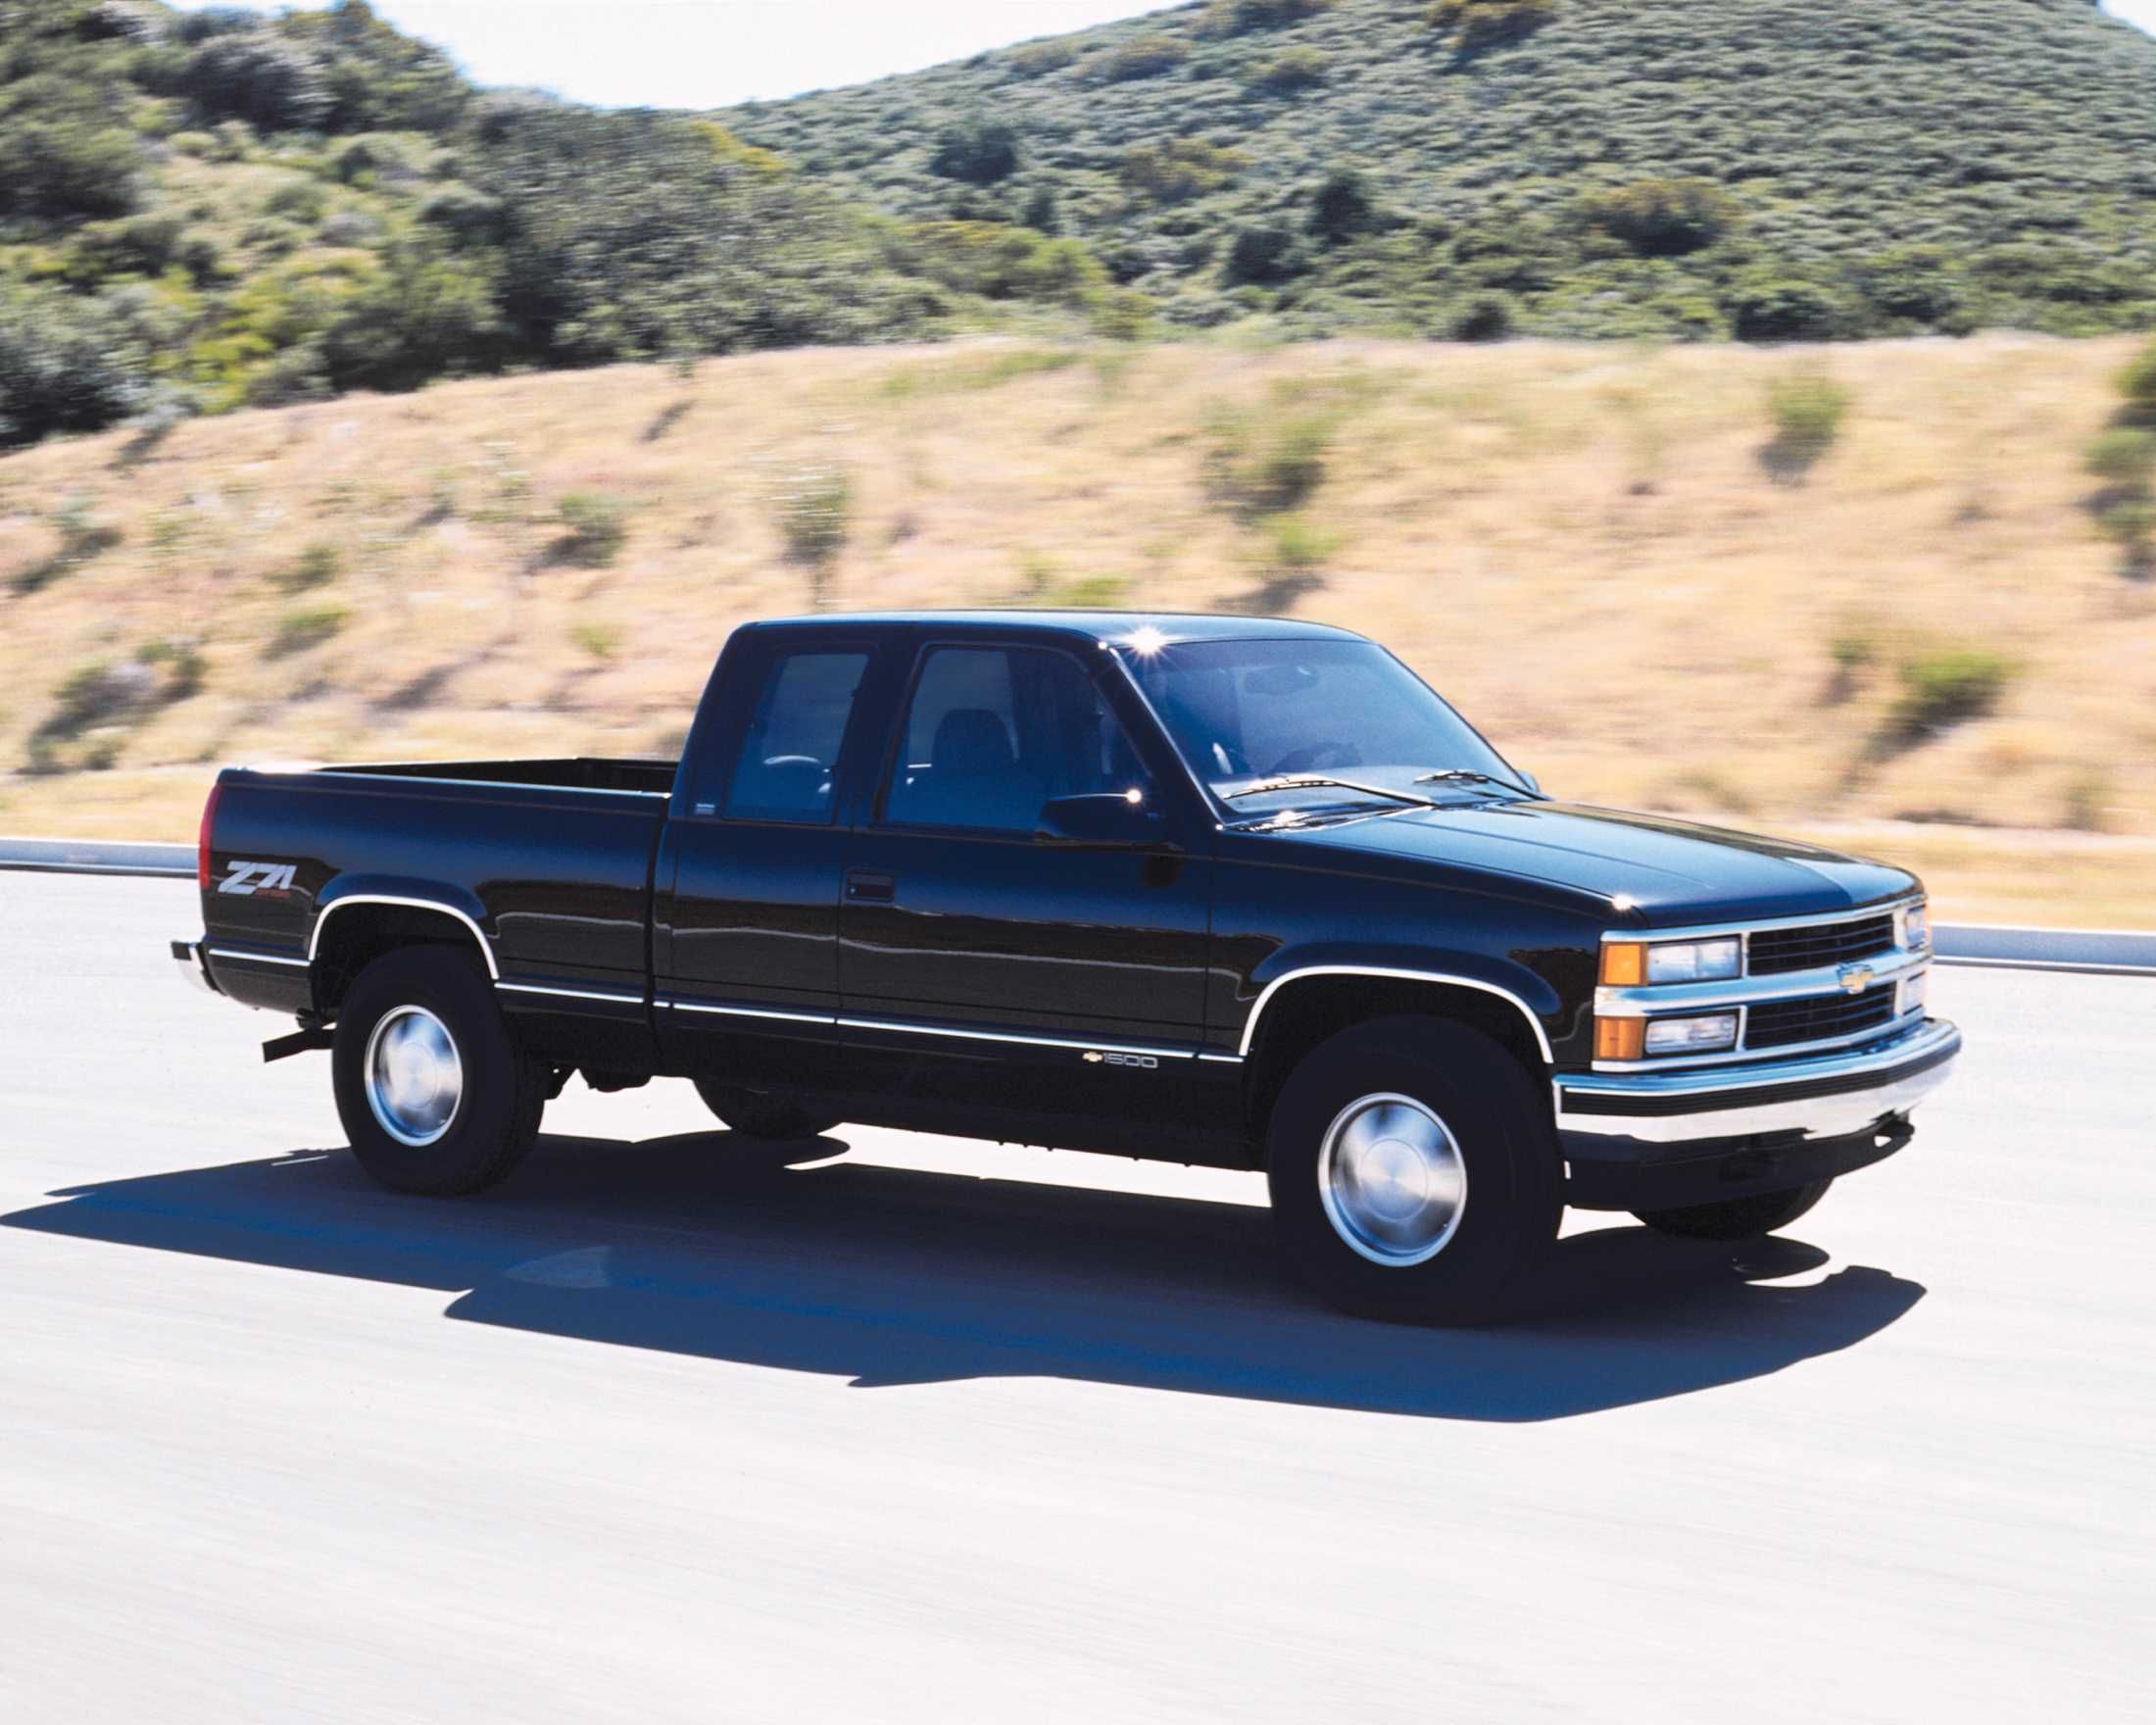 1999 Chevrolet Silverado: The best pickup truck of the '90s.